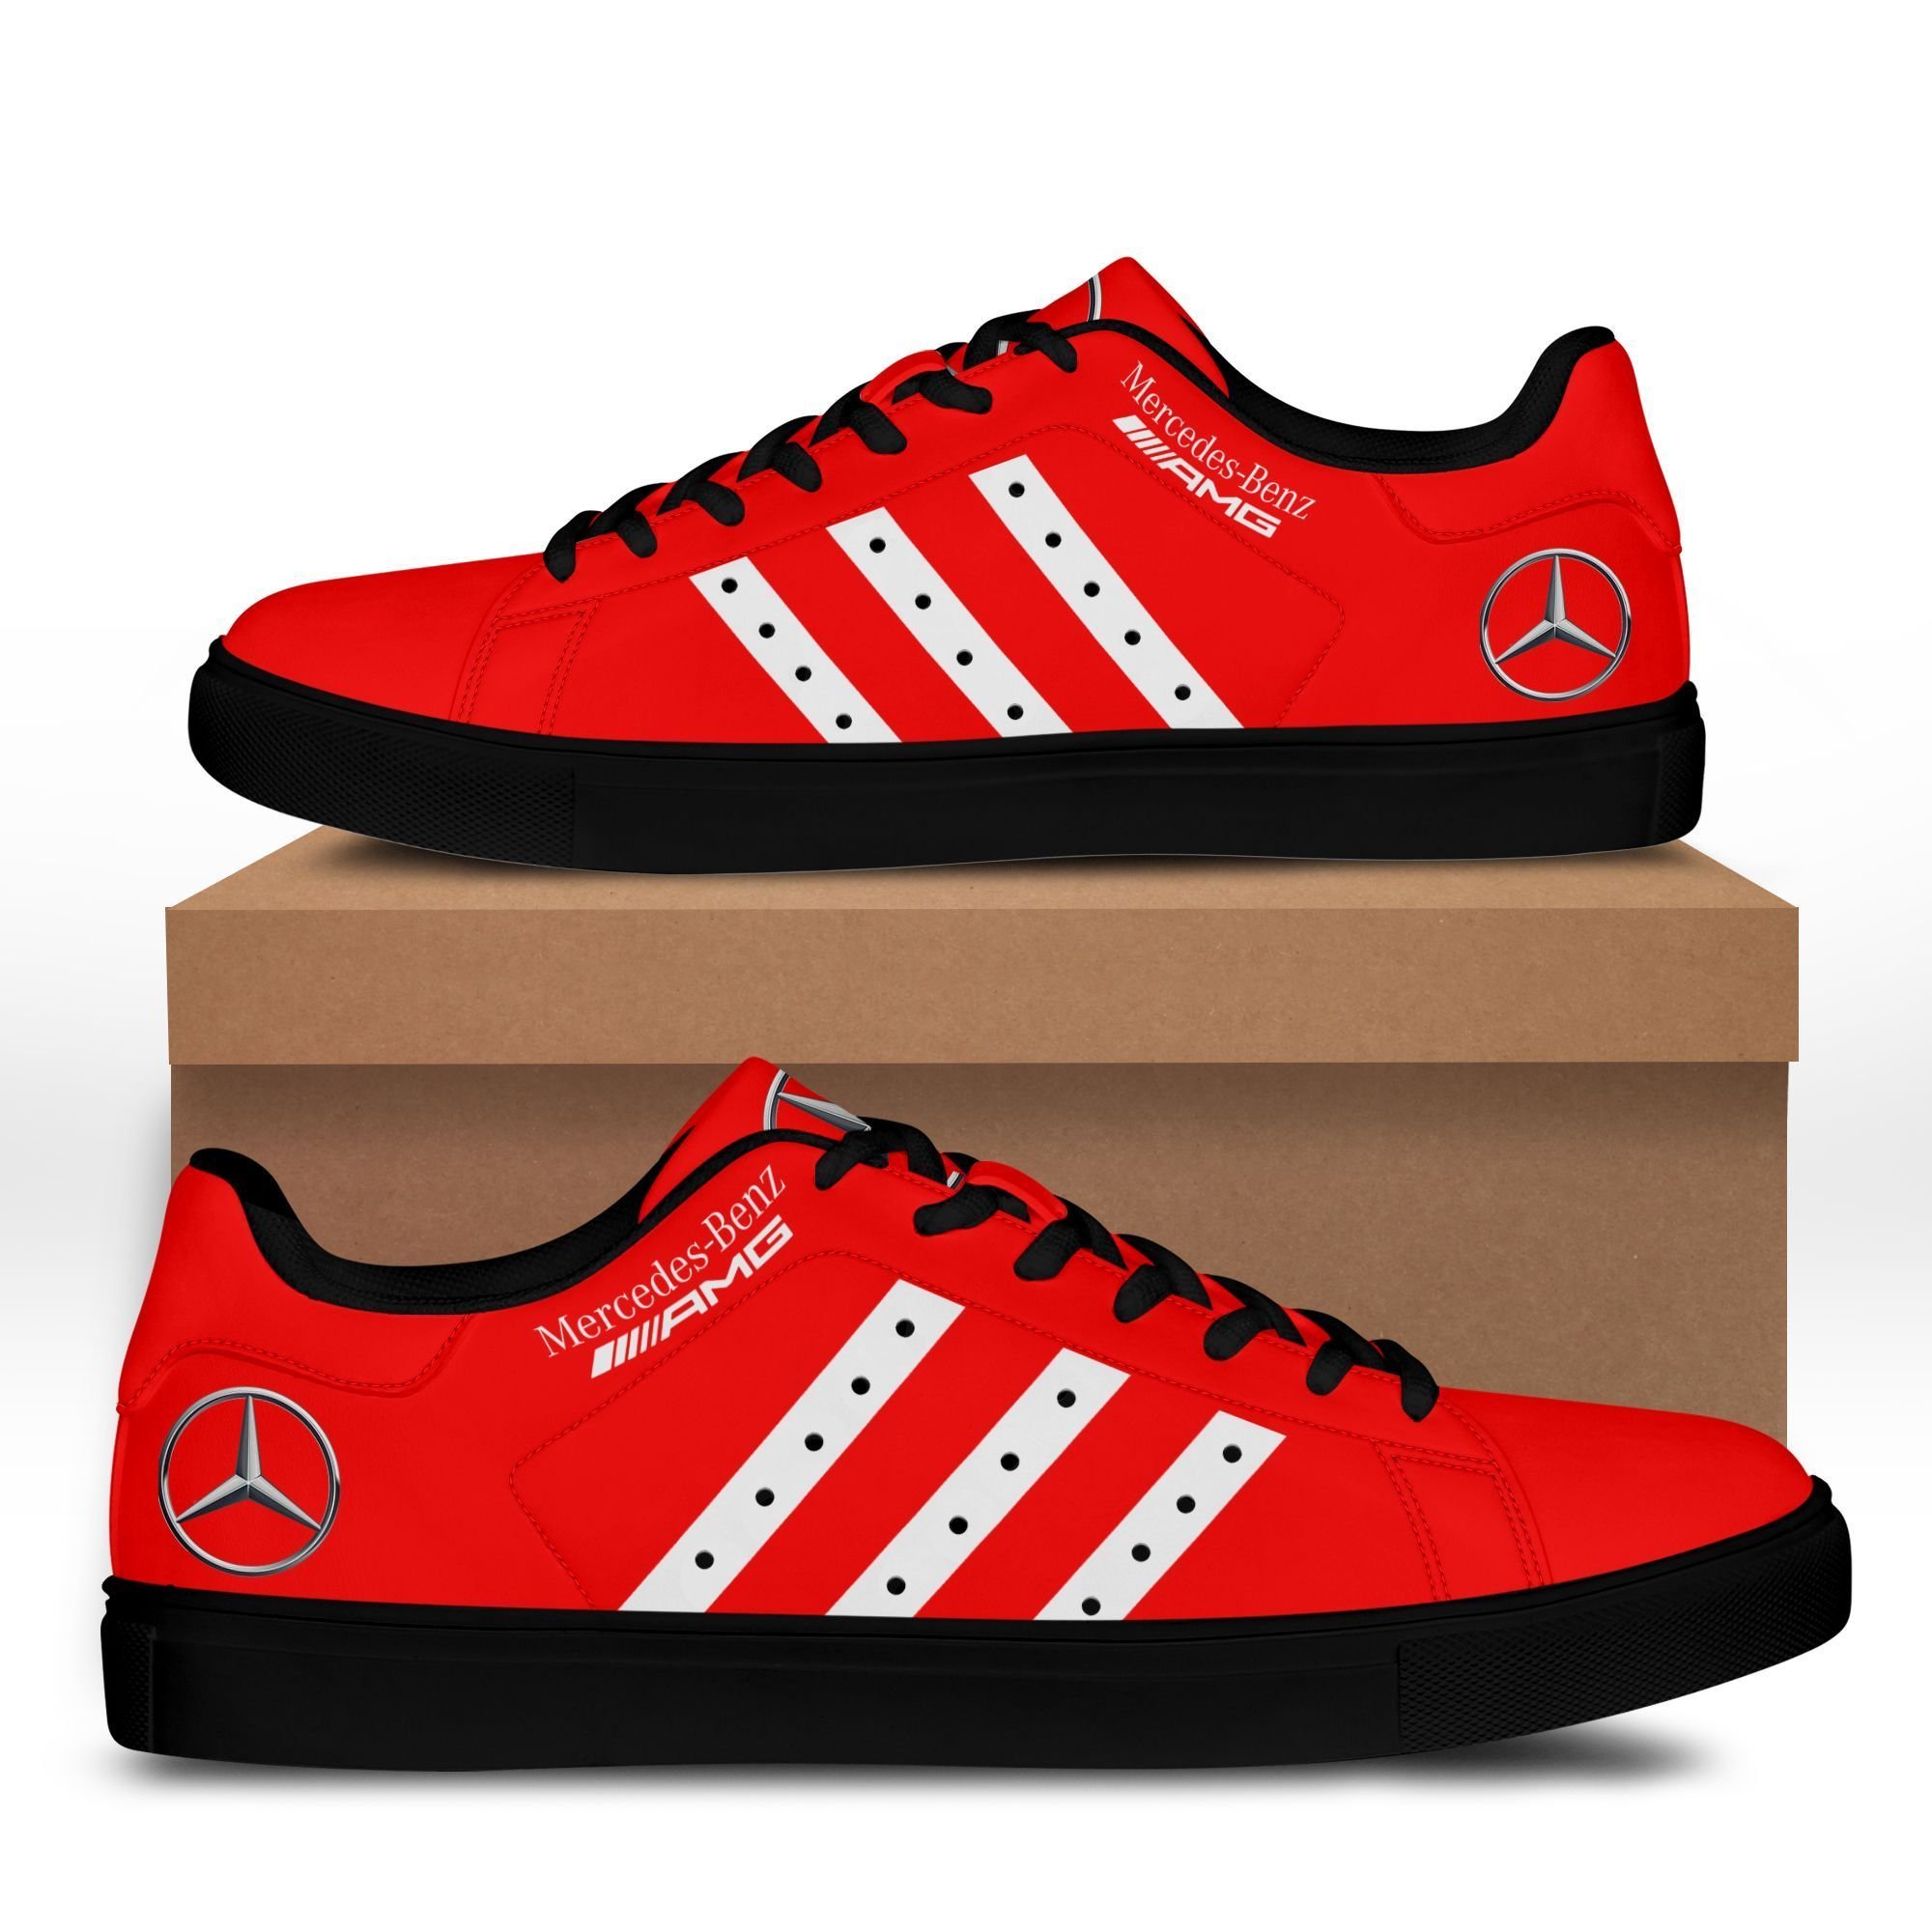 mercedes-amg-dvt-hl-st-smith-shoes-ver-1-red-yourshirtissobeautiful